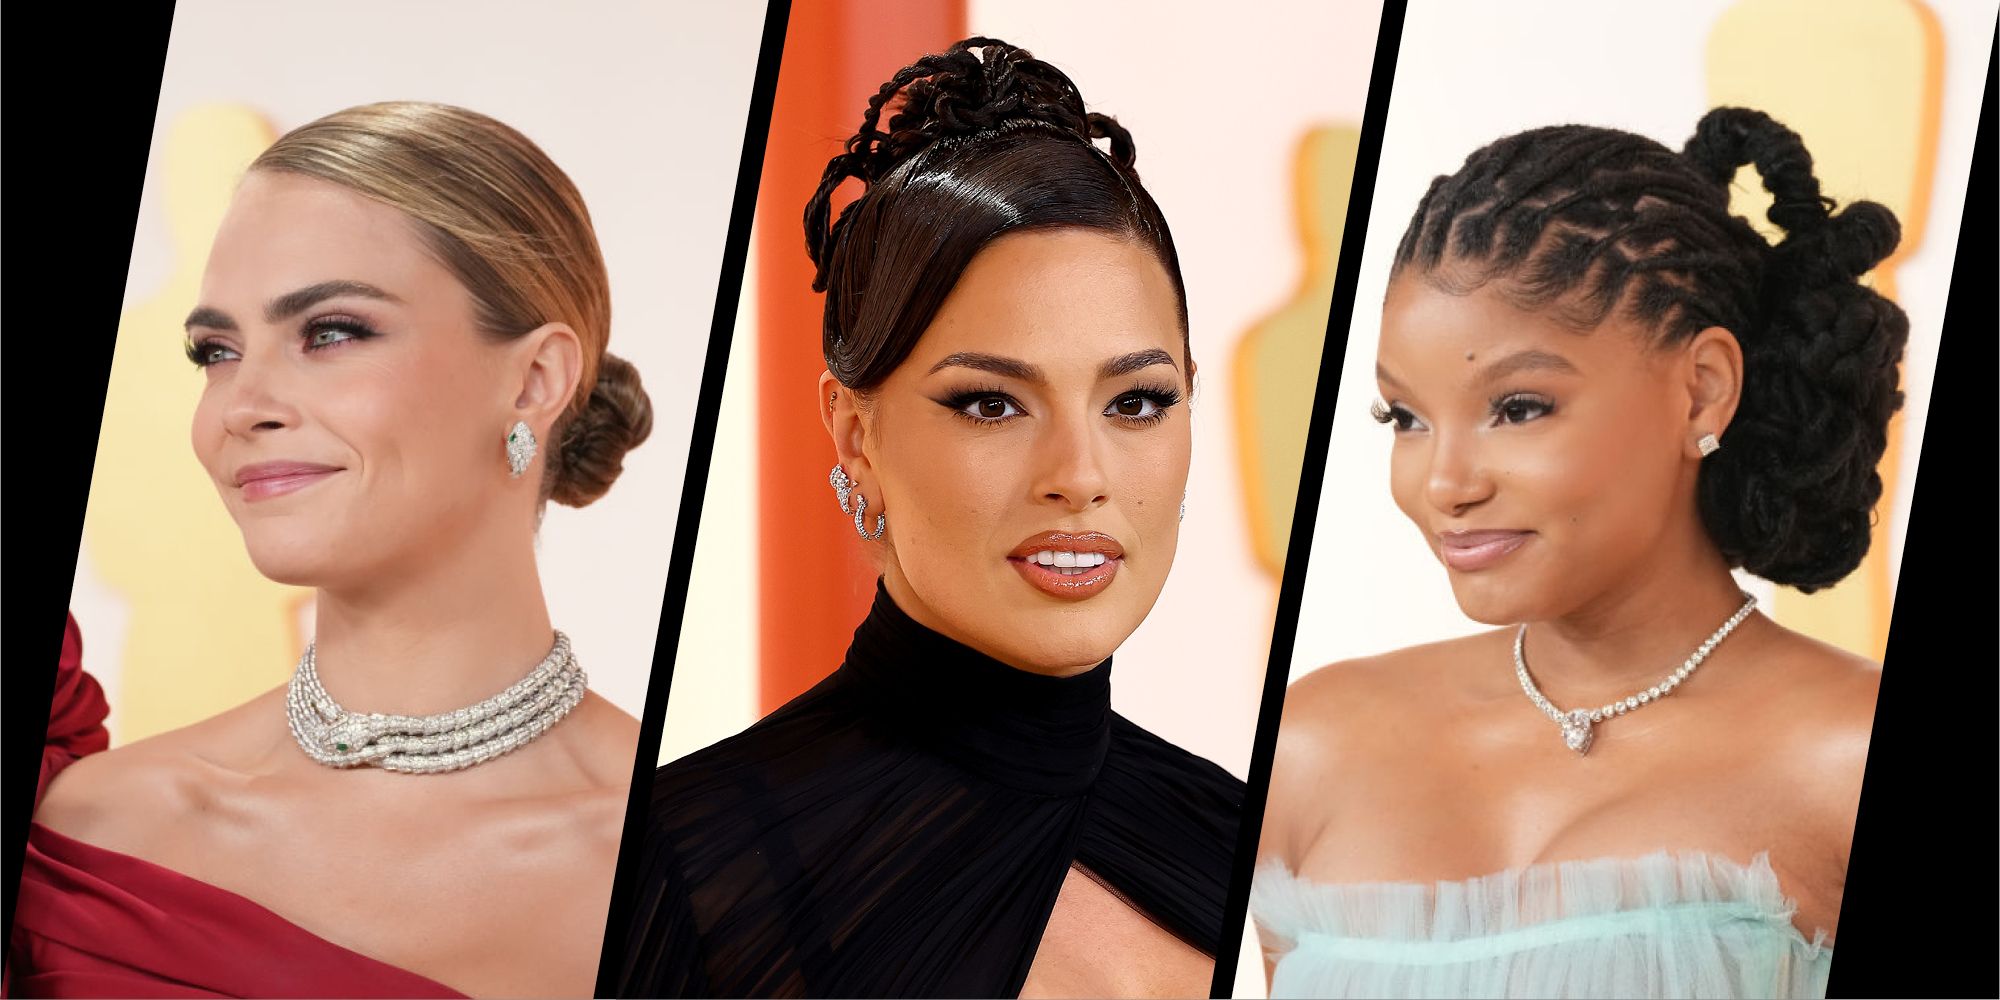 Lily Aldridge debuted a textured boyfriend bob at the Oscars after